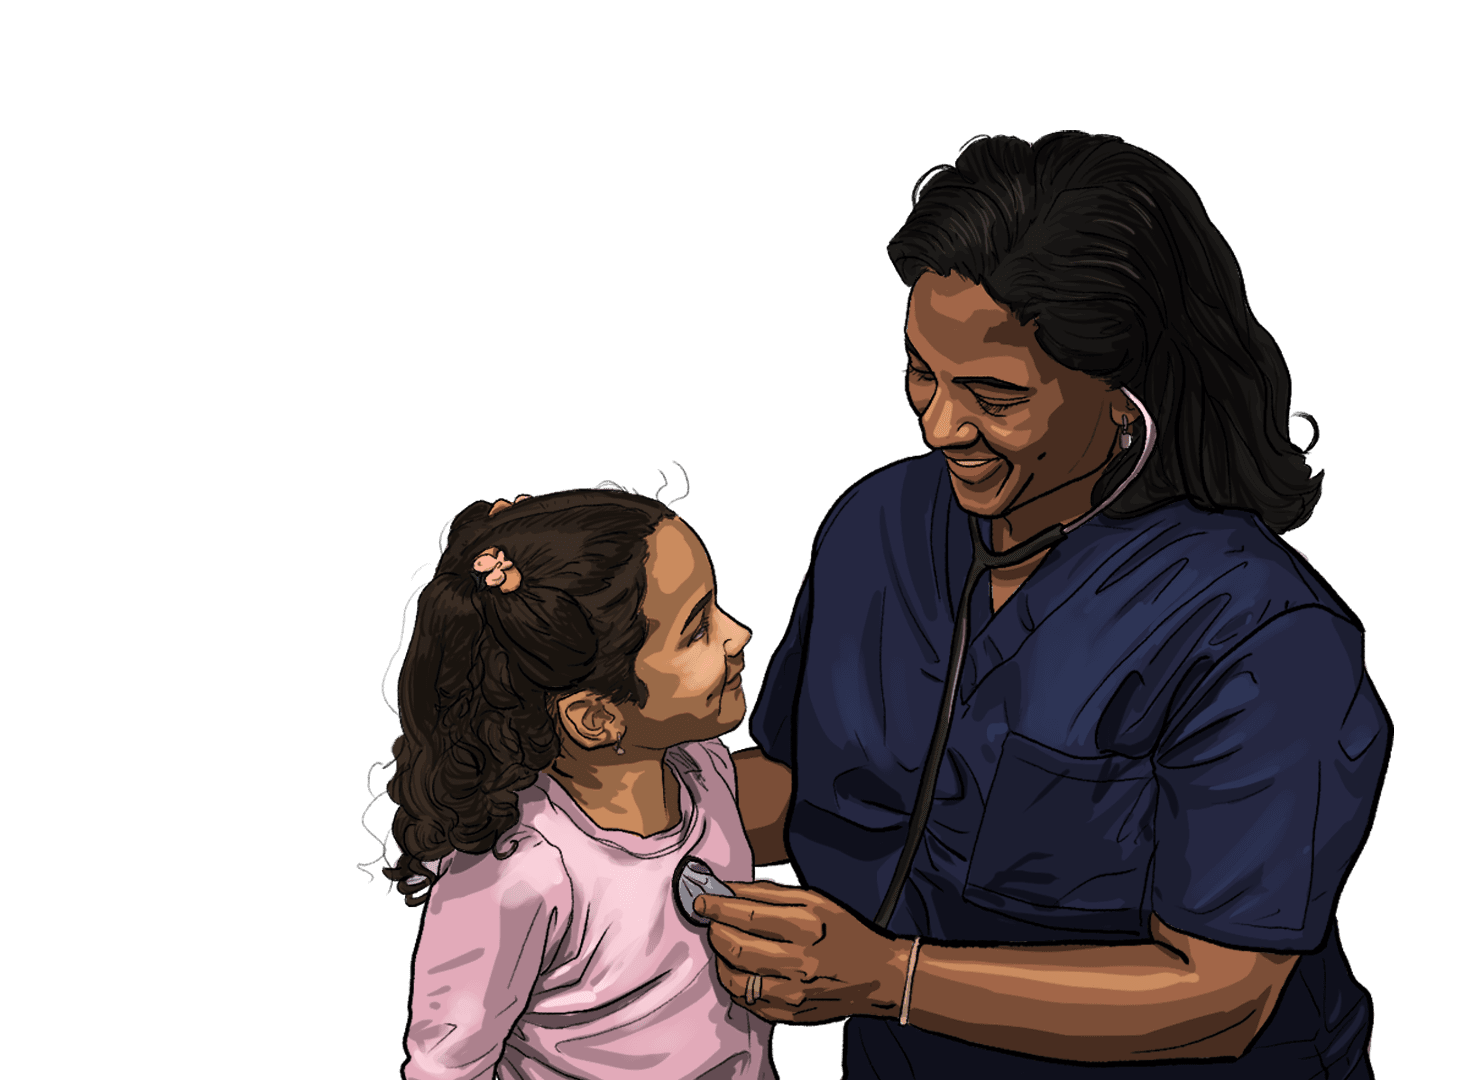 A sketch of a Medical Assistant listening to a child's heartbeat through a stethoscope, which is becoming more realistic.